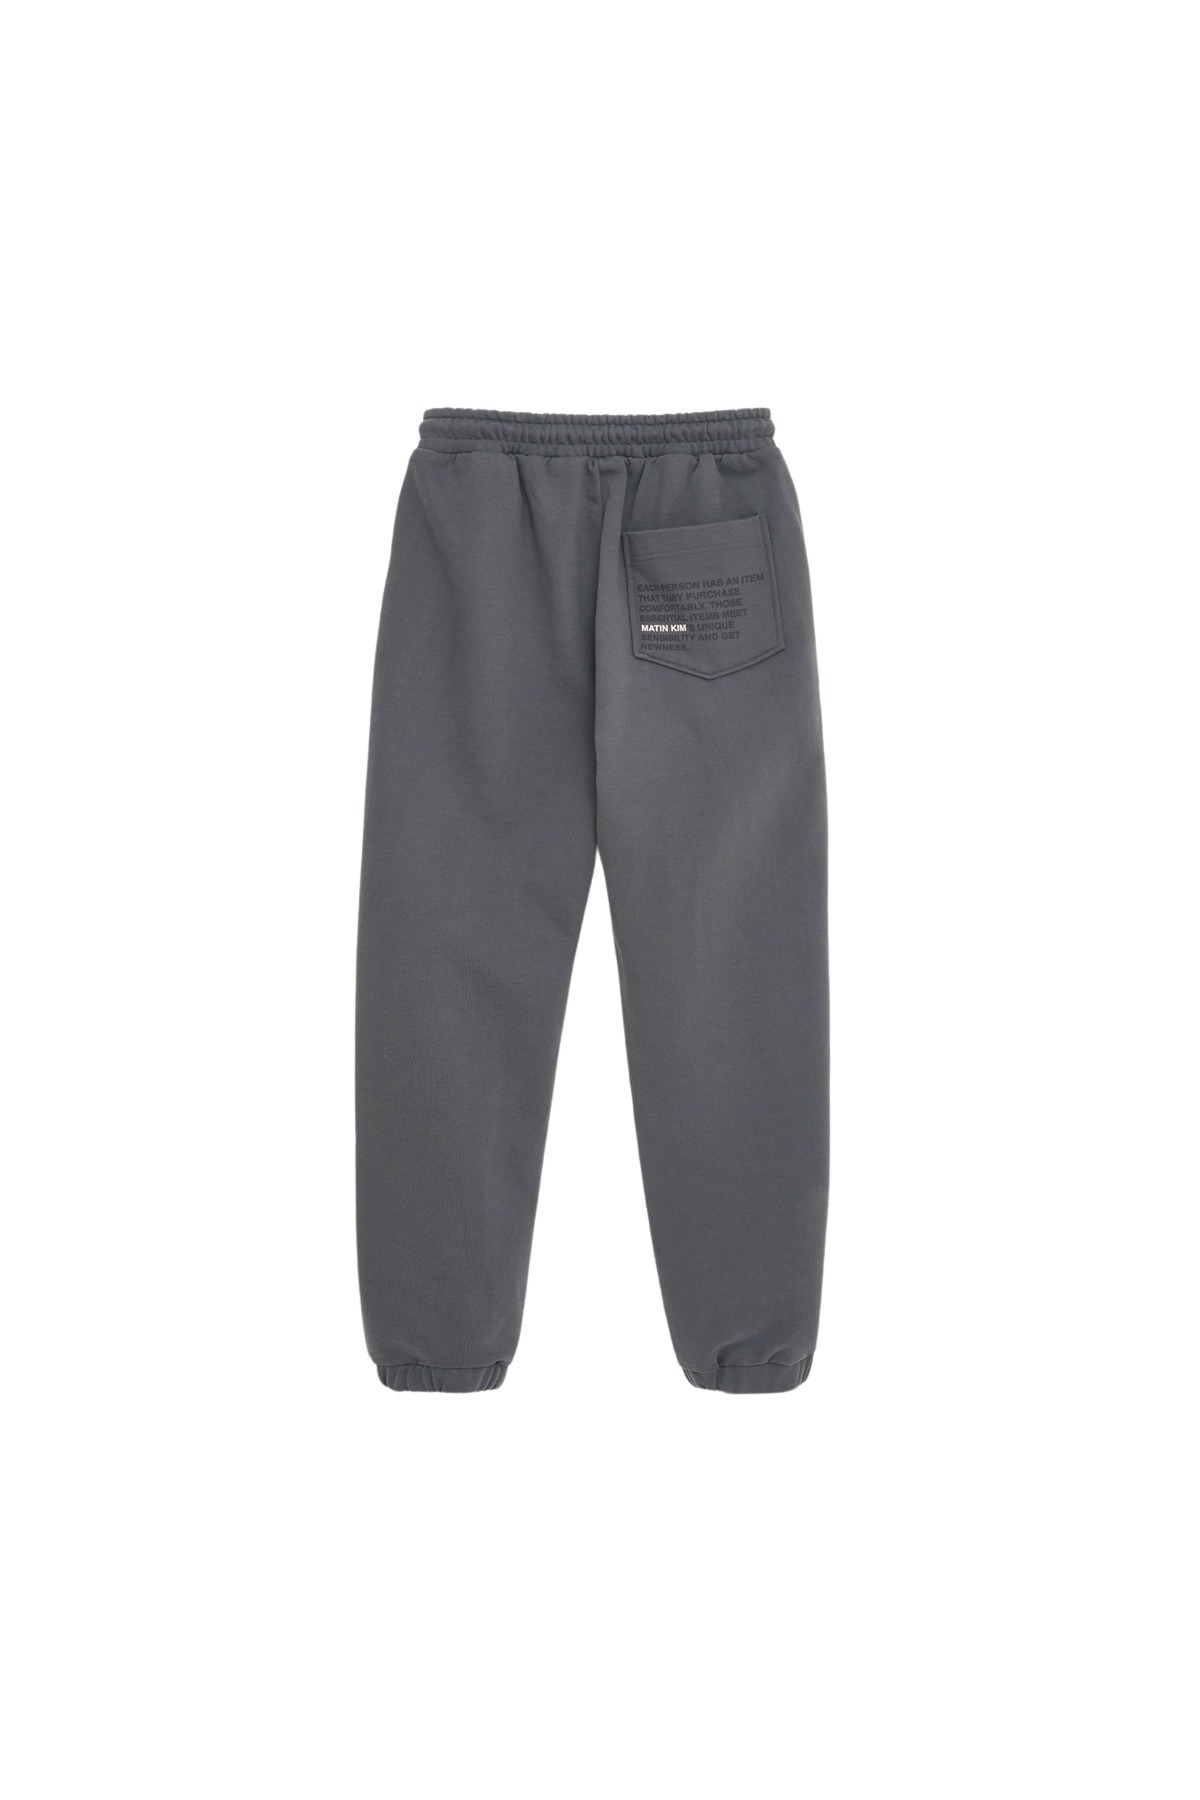 PINTUCK JOGGER PANTS IN CHARCOAL